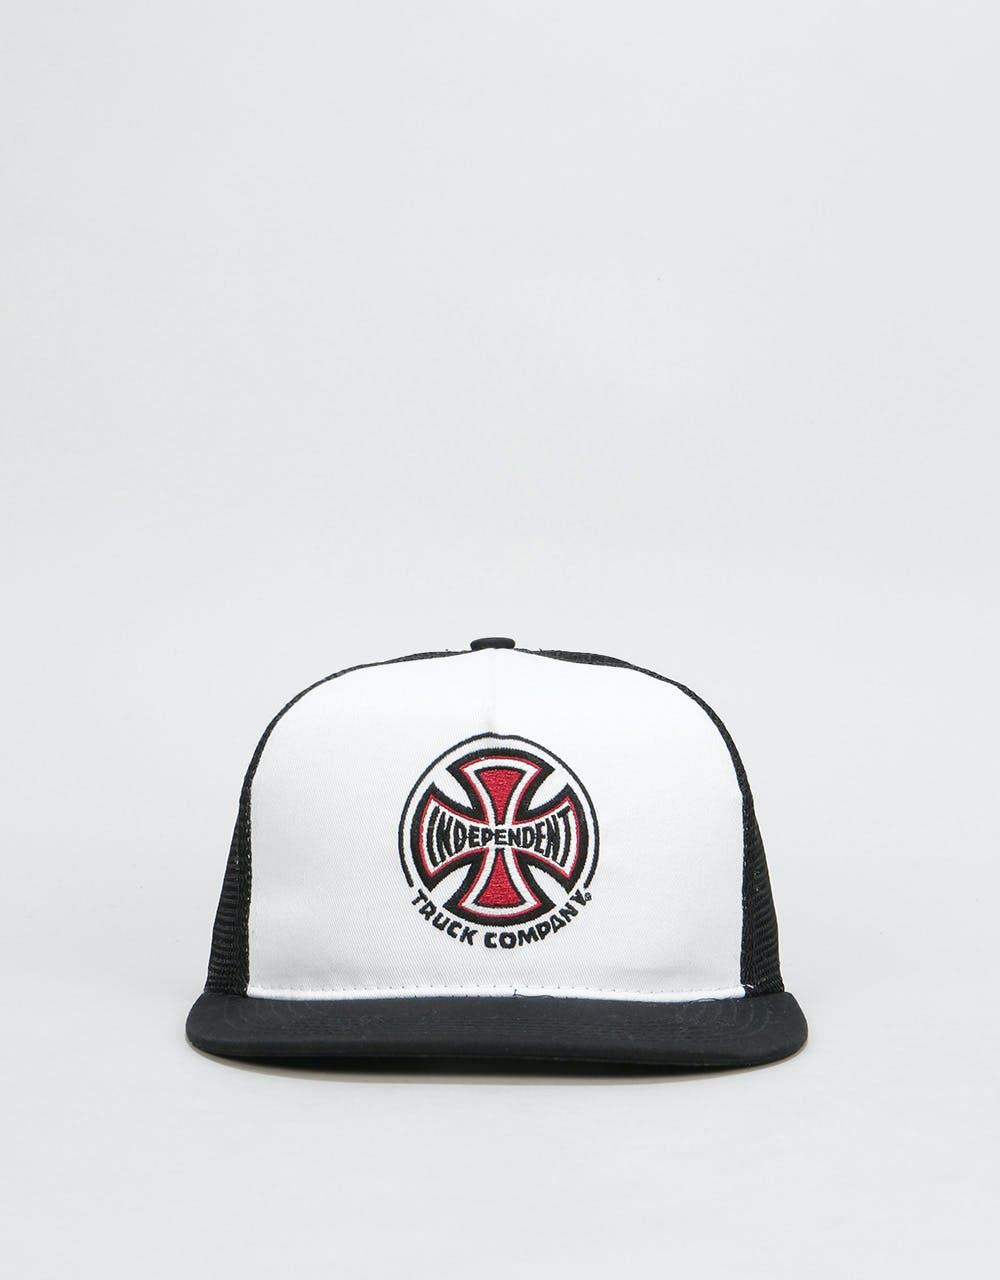 Independent Truck Co. Mesh Cap - Black/White